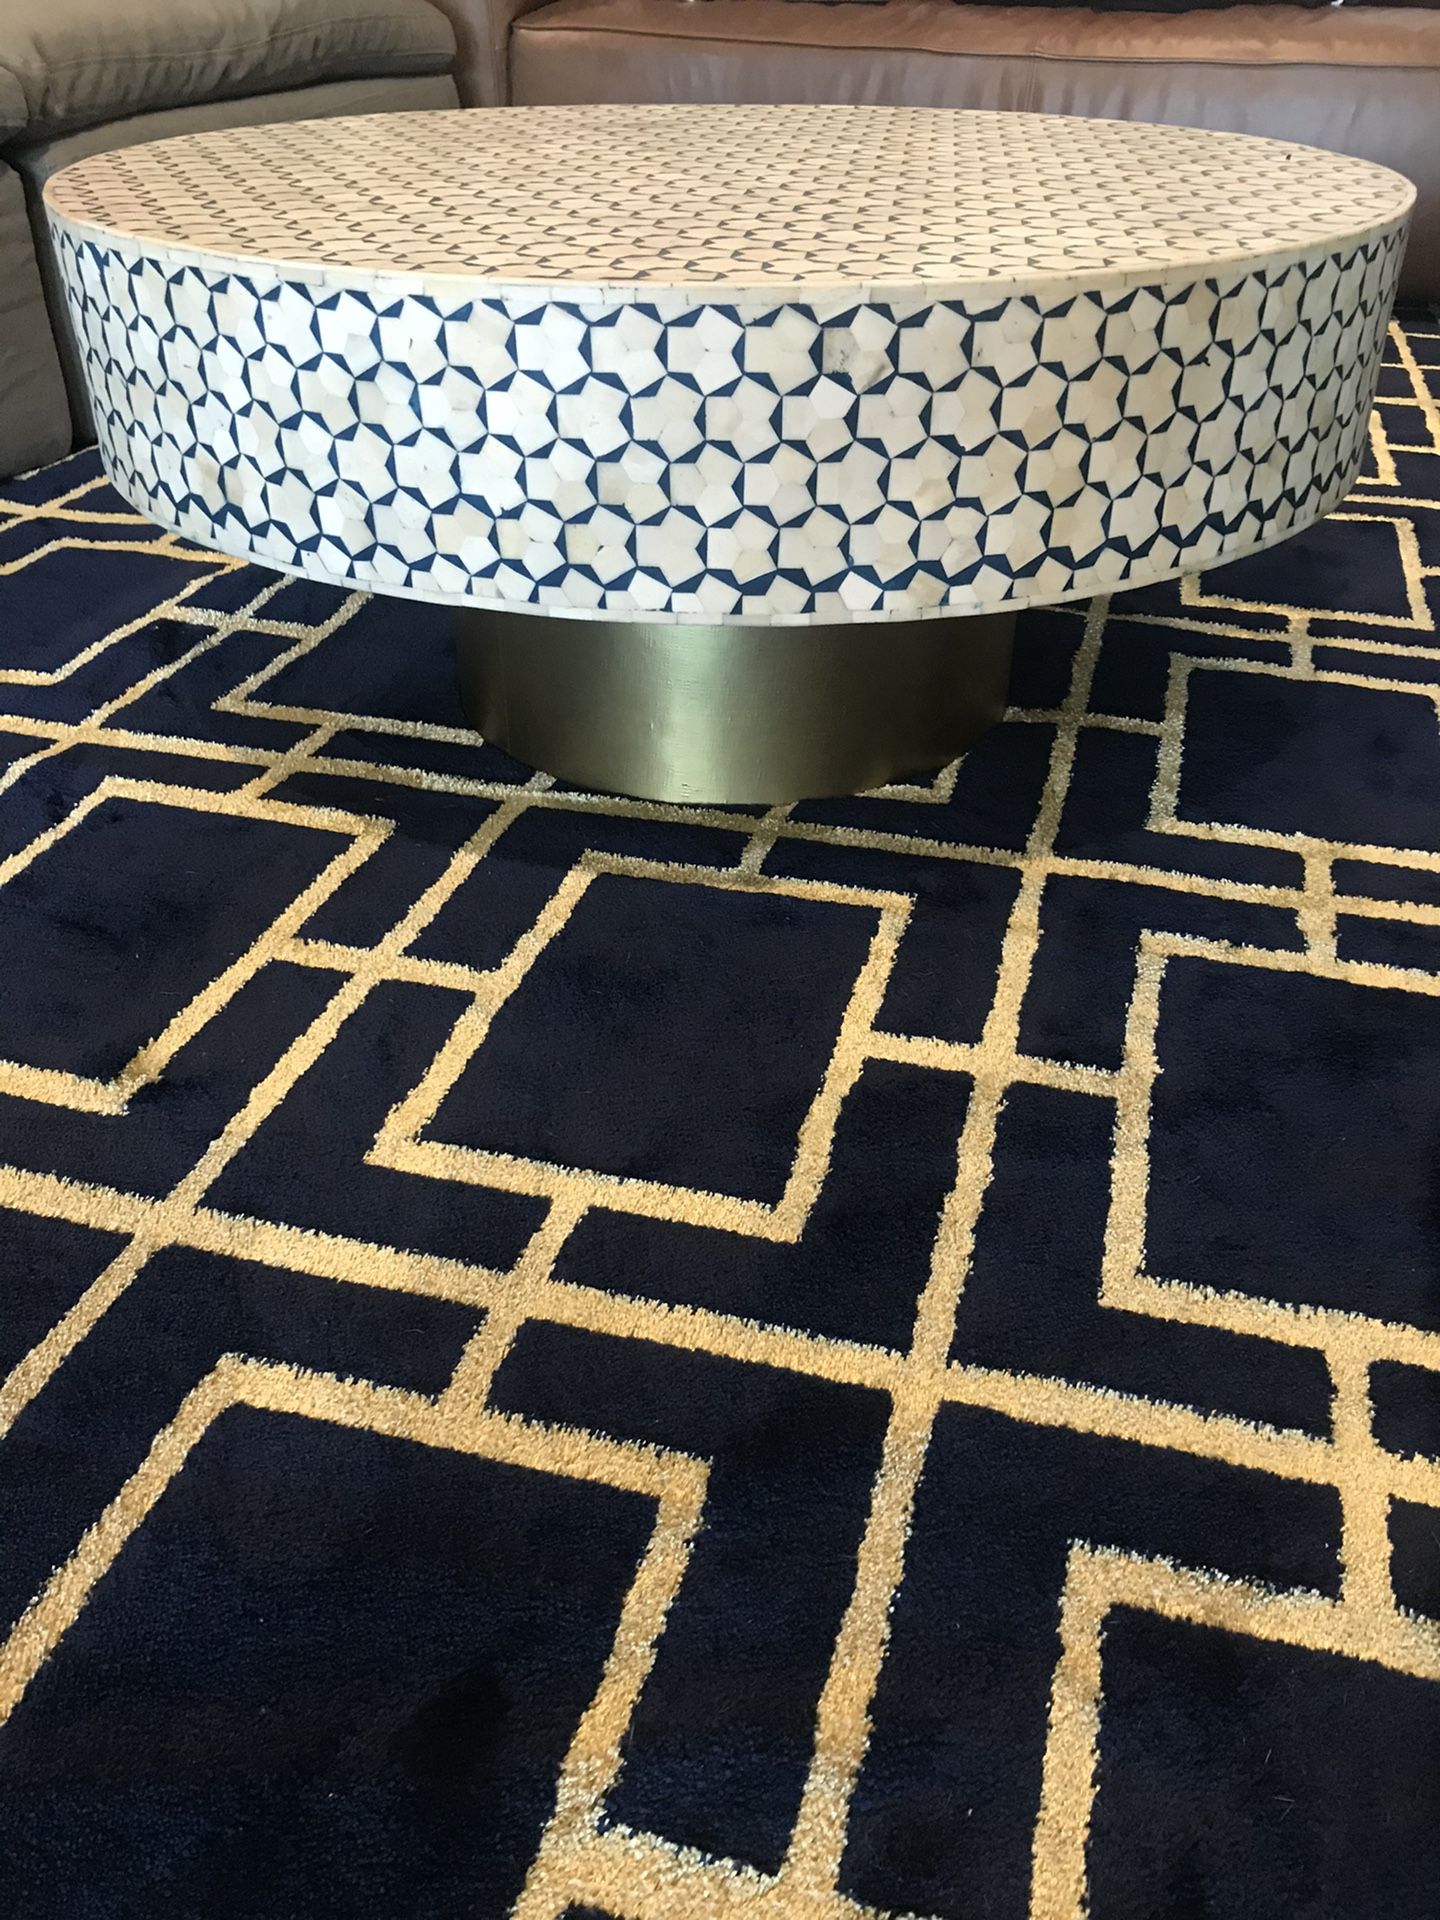 Anthropologie: Handmade turquoise, white, Gold, natural stone Coffee Table